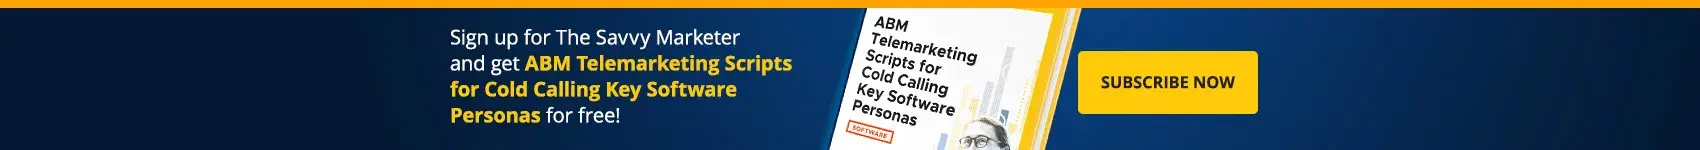 ABM Telemarketing Scripts for Cold Calling Key Software Personas MS